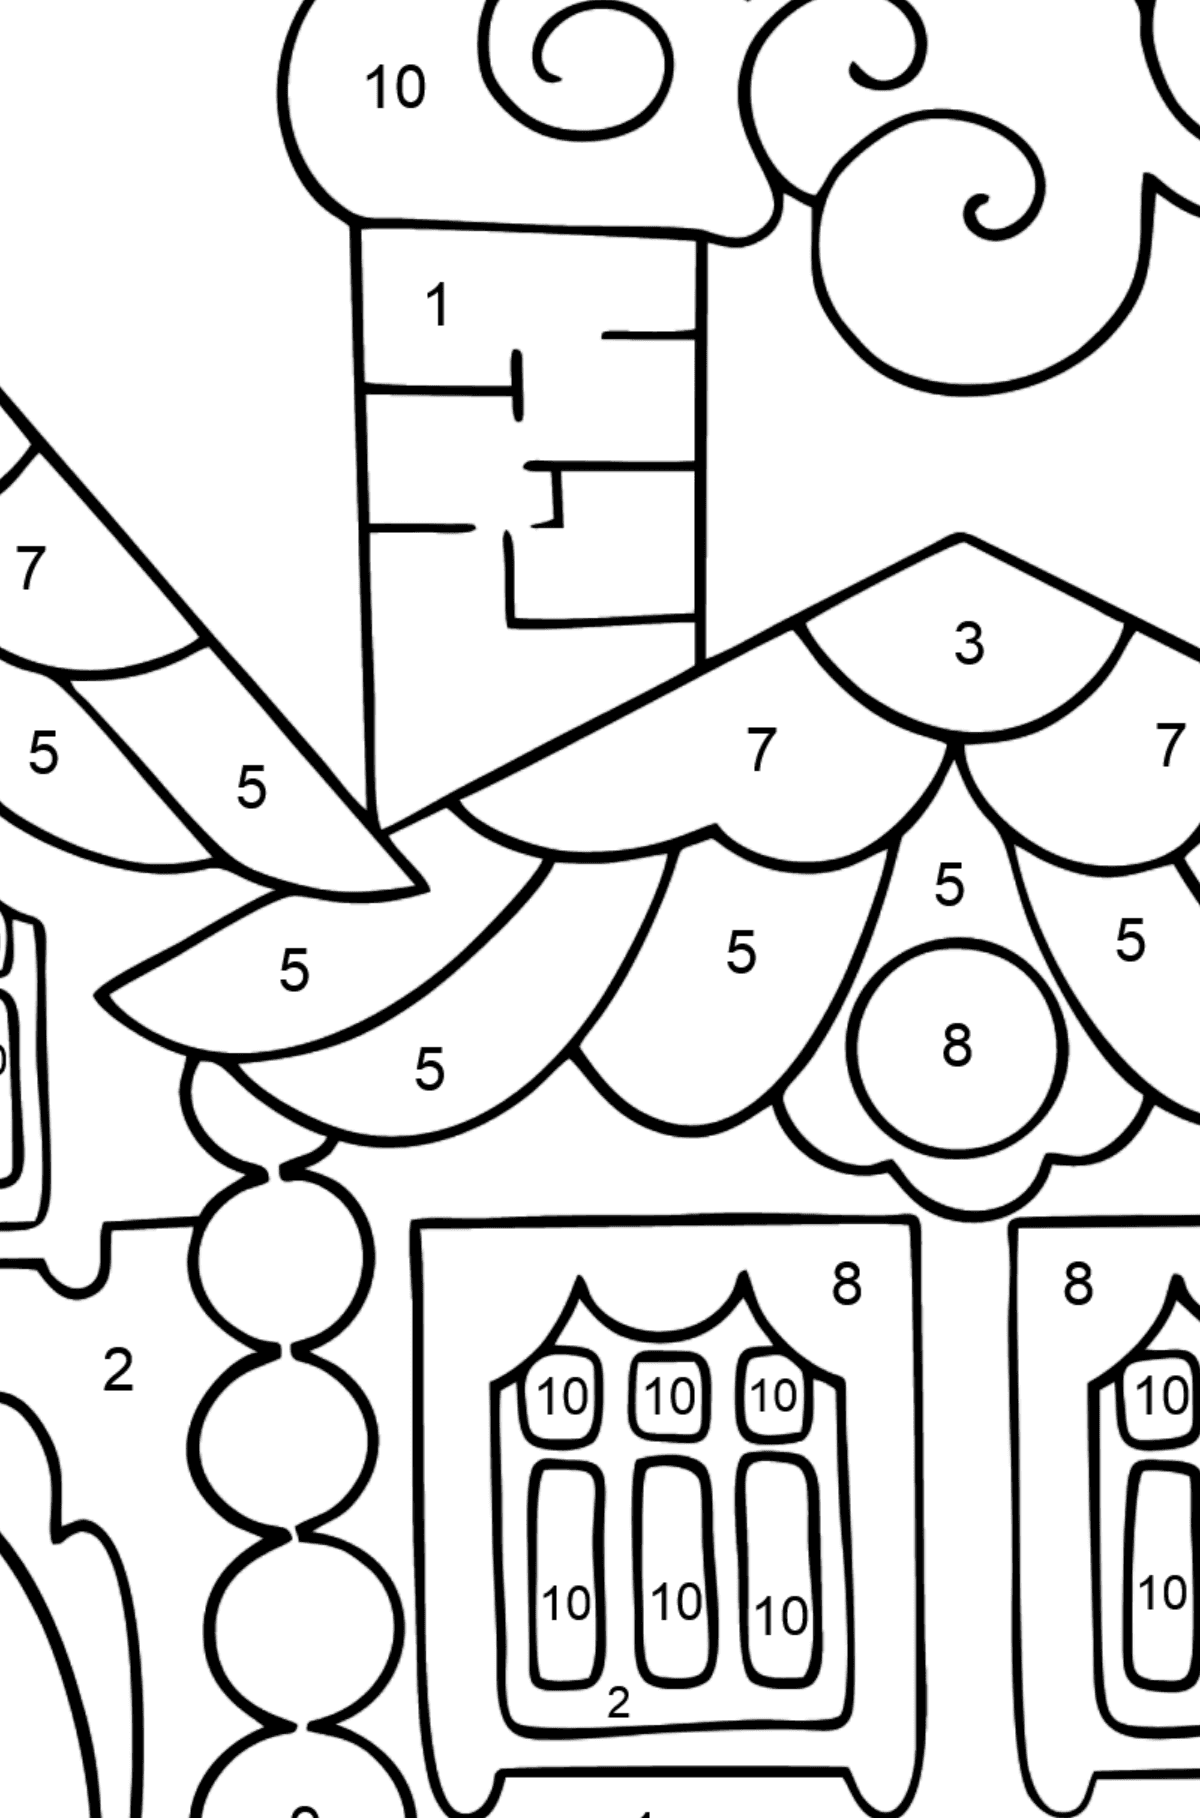 House in the Forest Coloring Page (difficult) - Coloring by Numbers for Kids